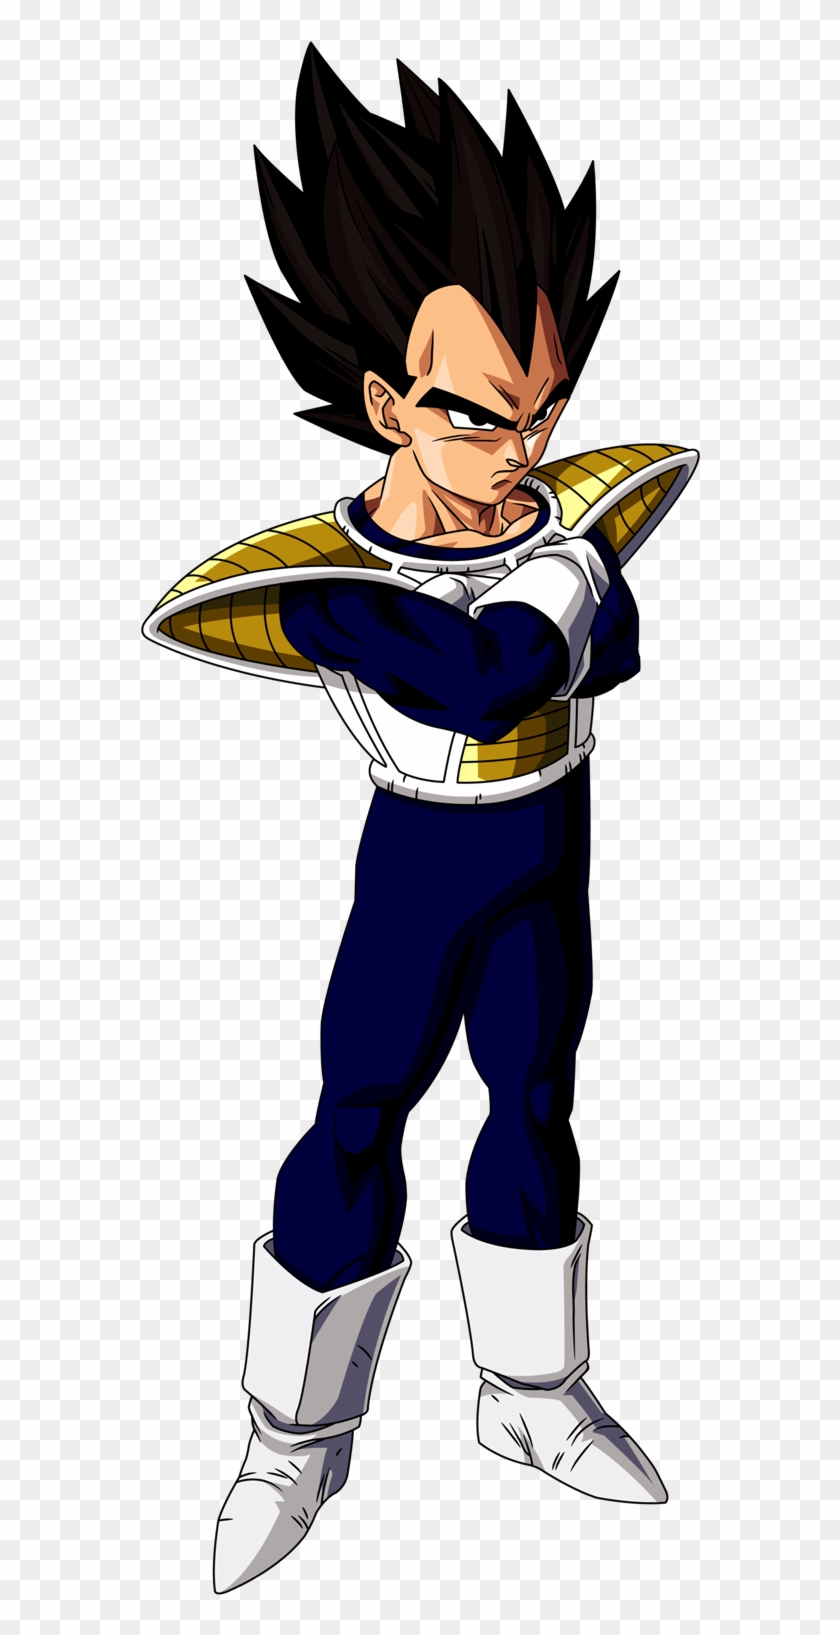 Dragon Ball Z Characters No Background Clipart